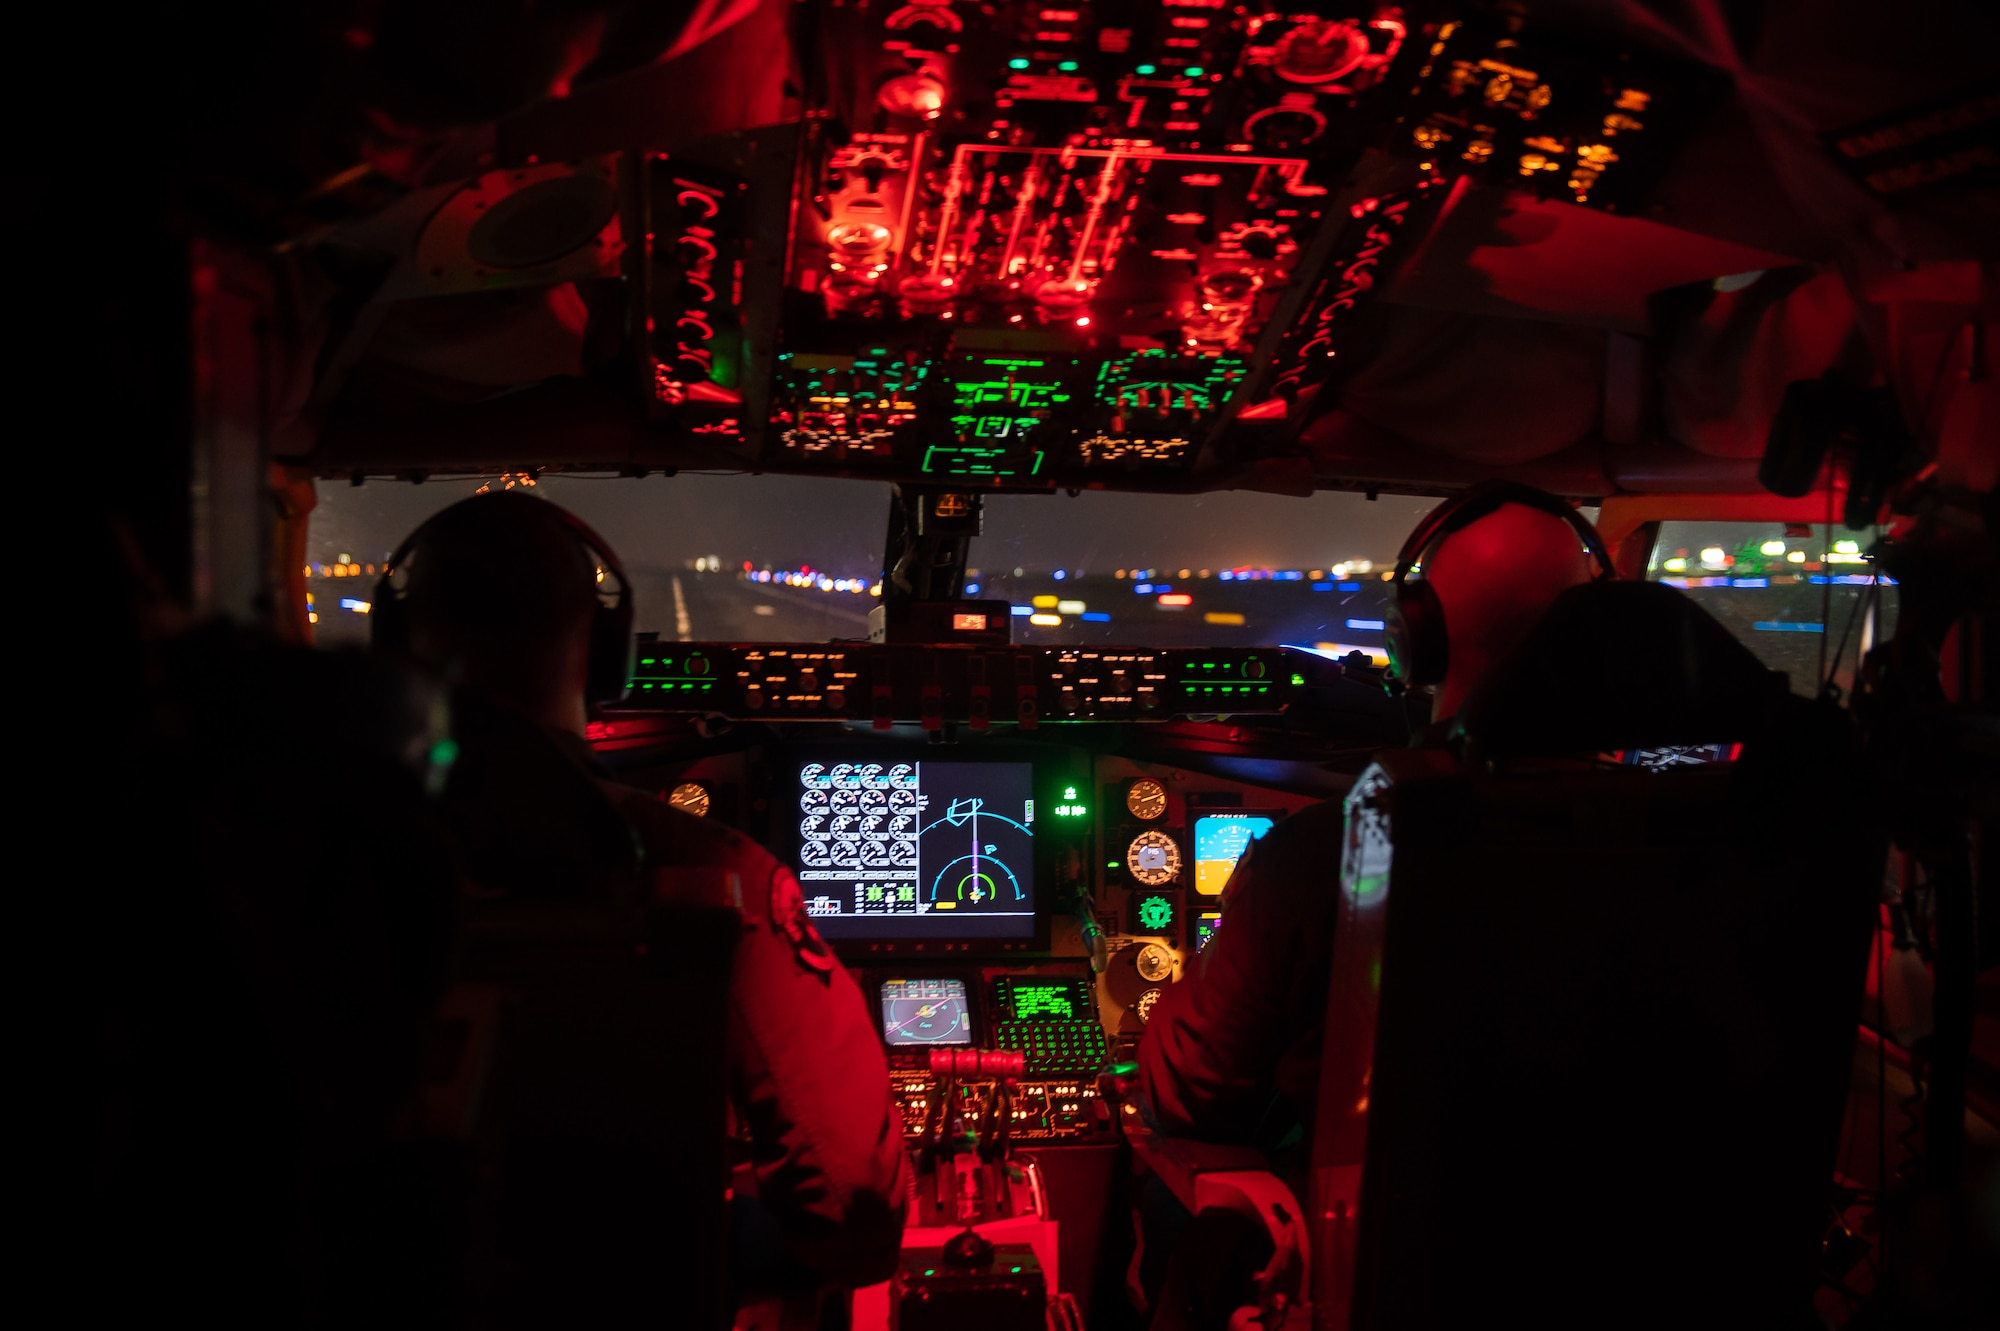 A cockpit is lit up red as two pilots land a plane